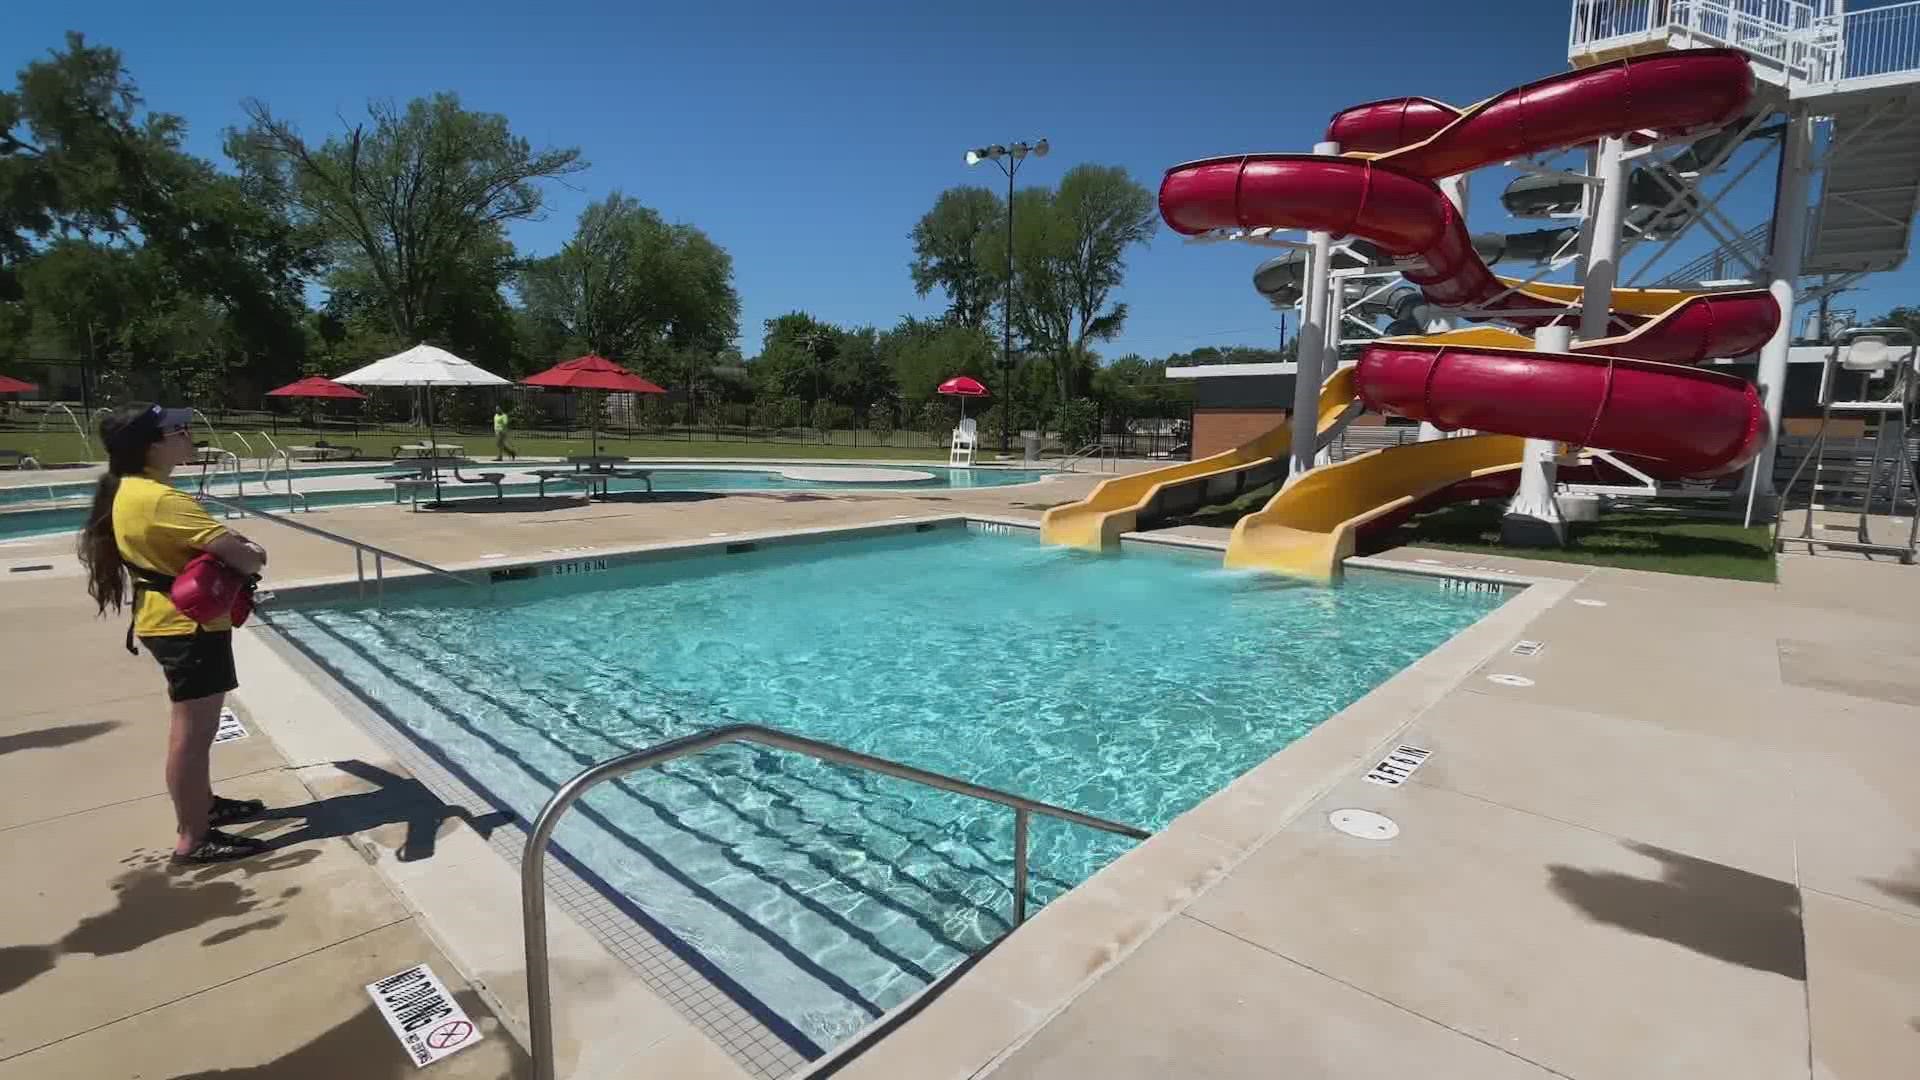 Saturday, May 28, Robles and his team will start by opening The Cove Aquatic Center at Fretz, The Cove Aquatic Center at Samuell Grand, and The Cove at Crawford.